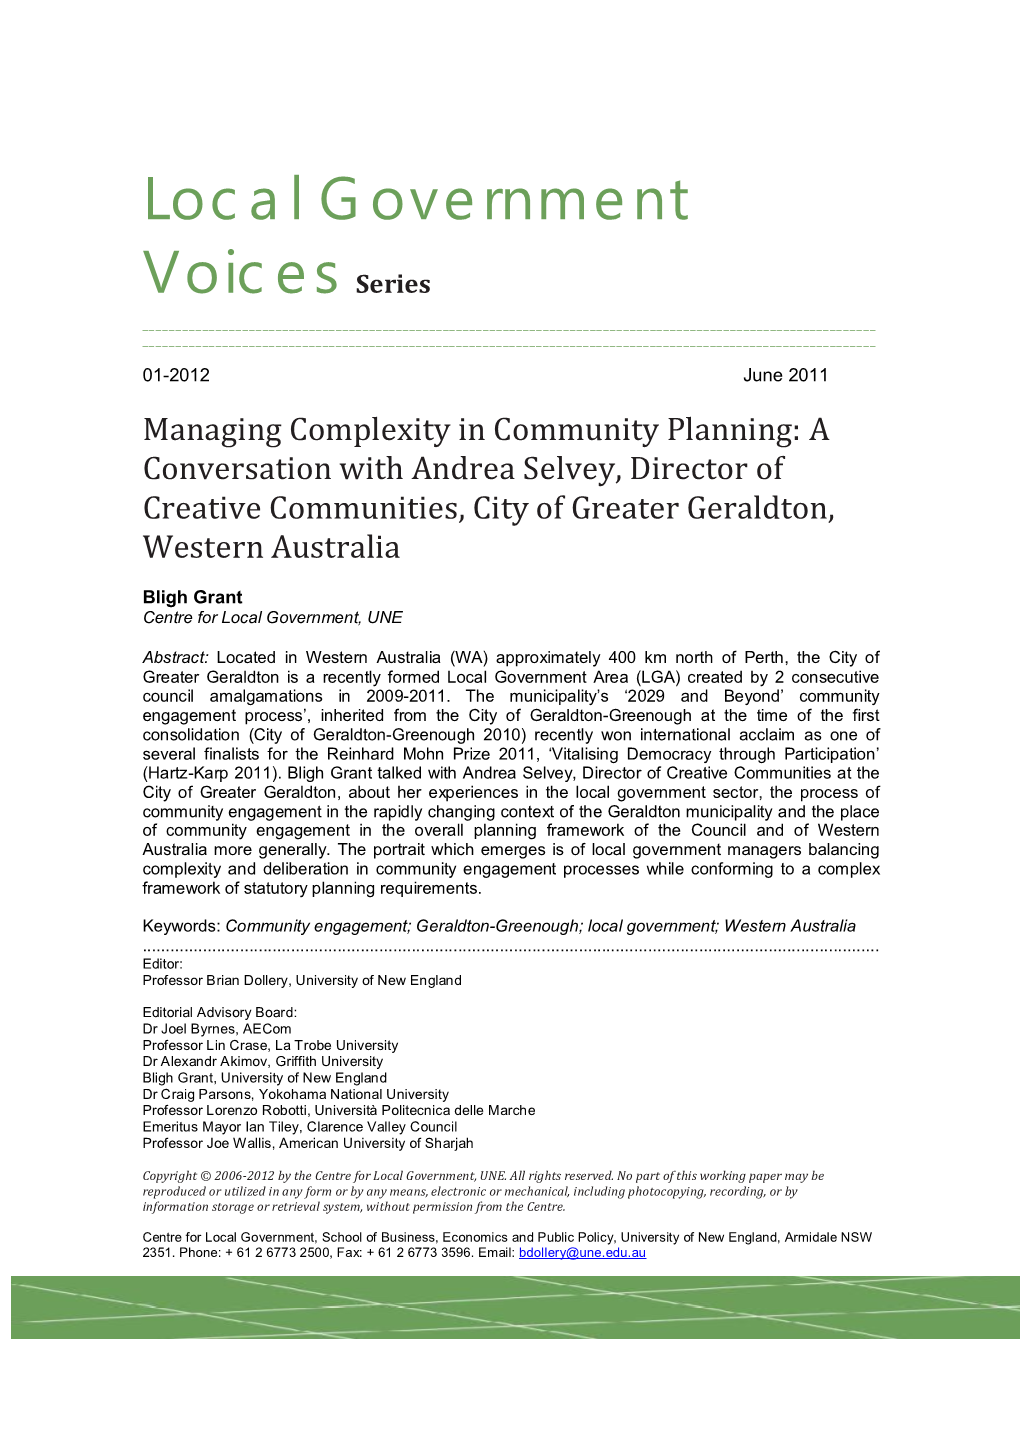 A Conversation with Andrea Selvey, Director of Creative Communities, City of Greater Geraldton, Western Australia